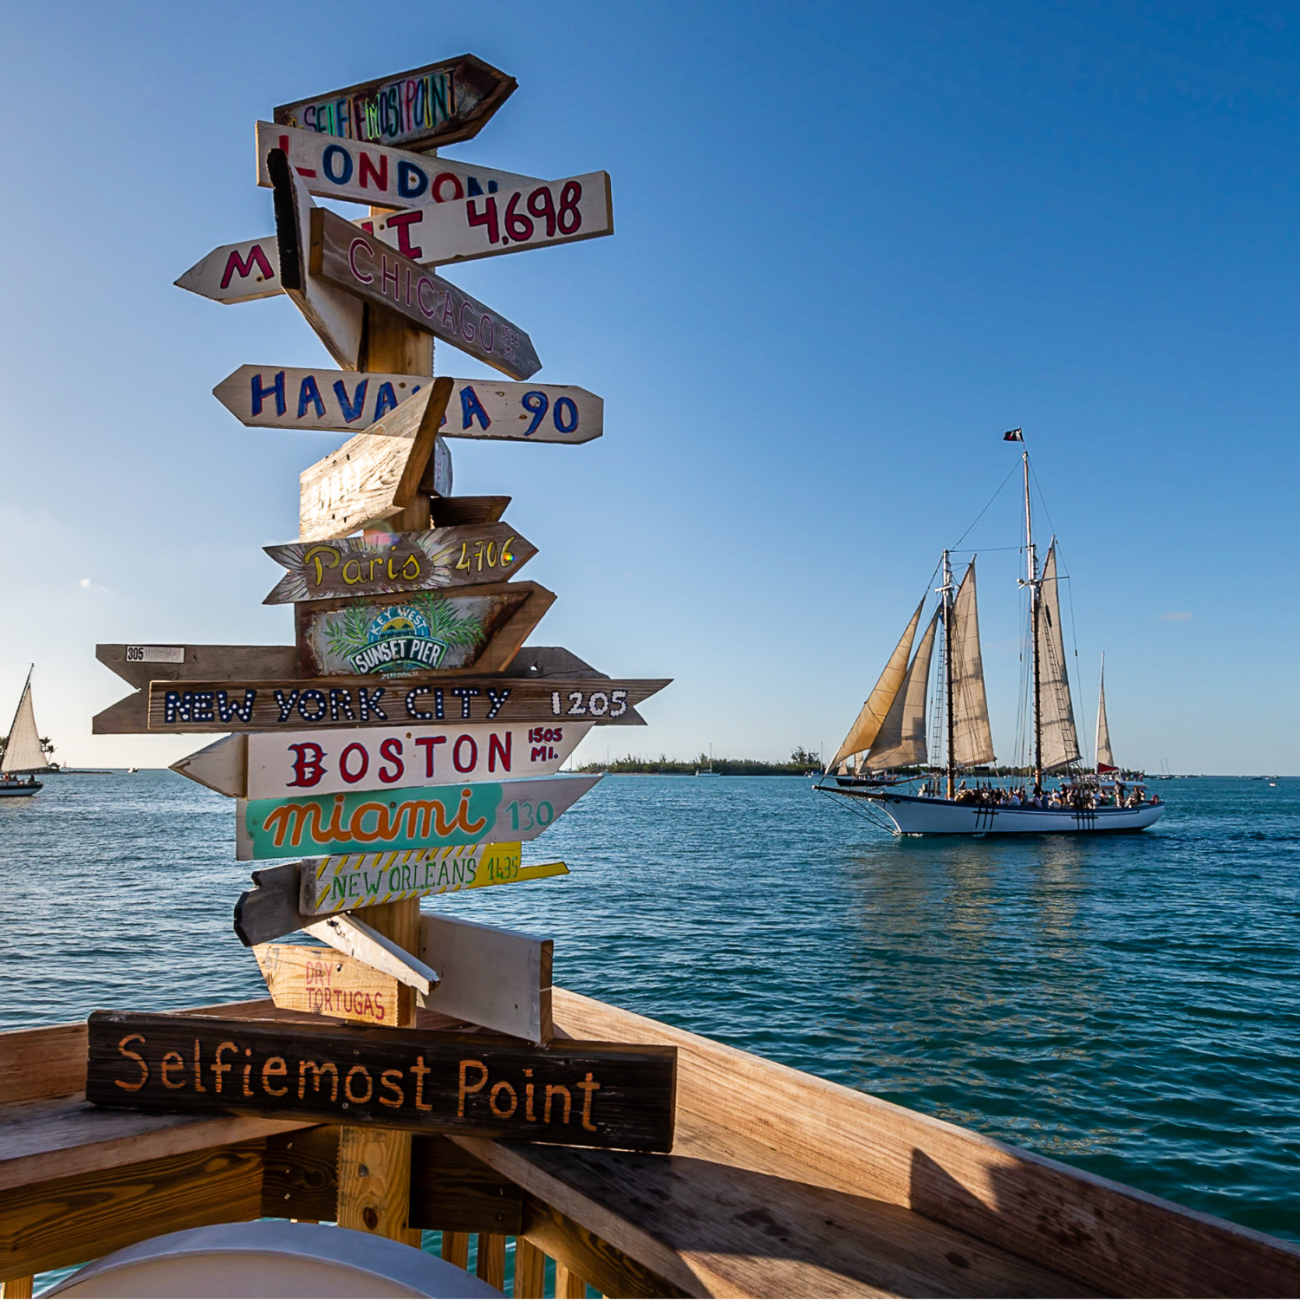 Signs at the southernmost point of Key West, and the USA. "Selfiemost Point", "Boston", "Miami" are posted. A sailboat on the ocean is in the background.